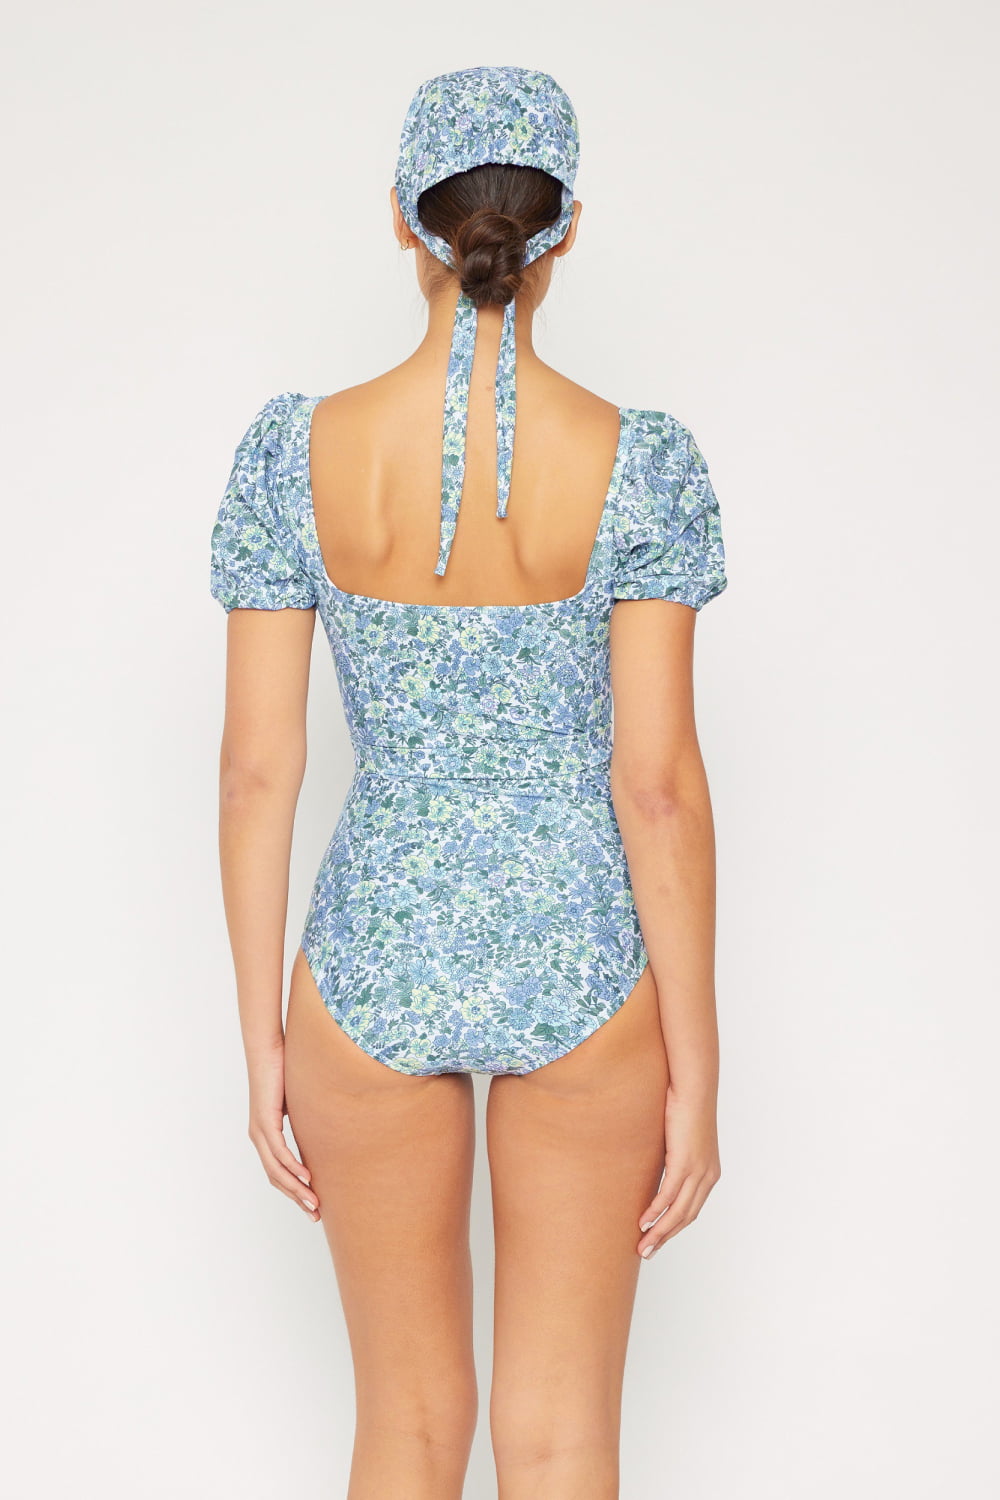 Marina West Swim Salty Air Puff Sleeve One-Piece in Blue Mother Daughter Swimwear Sunset and Swim   